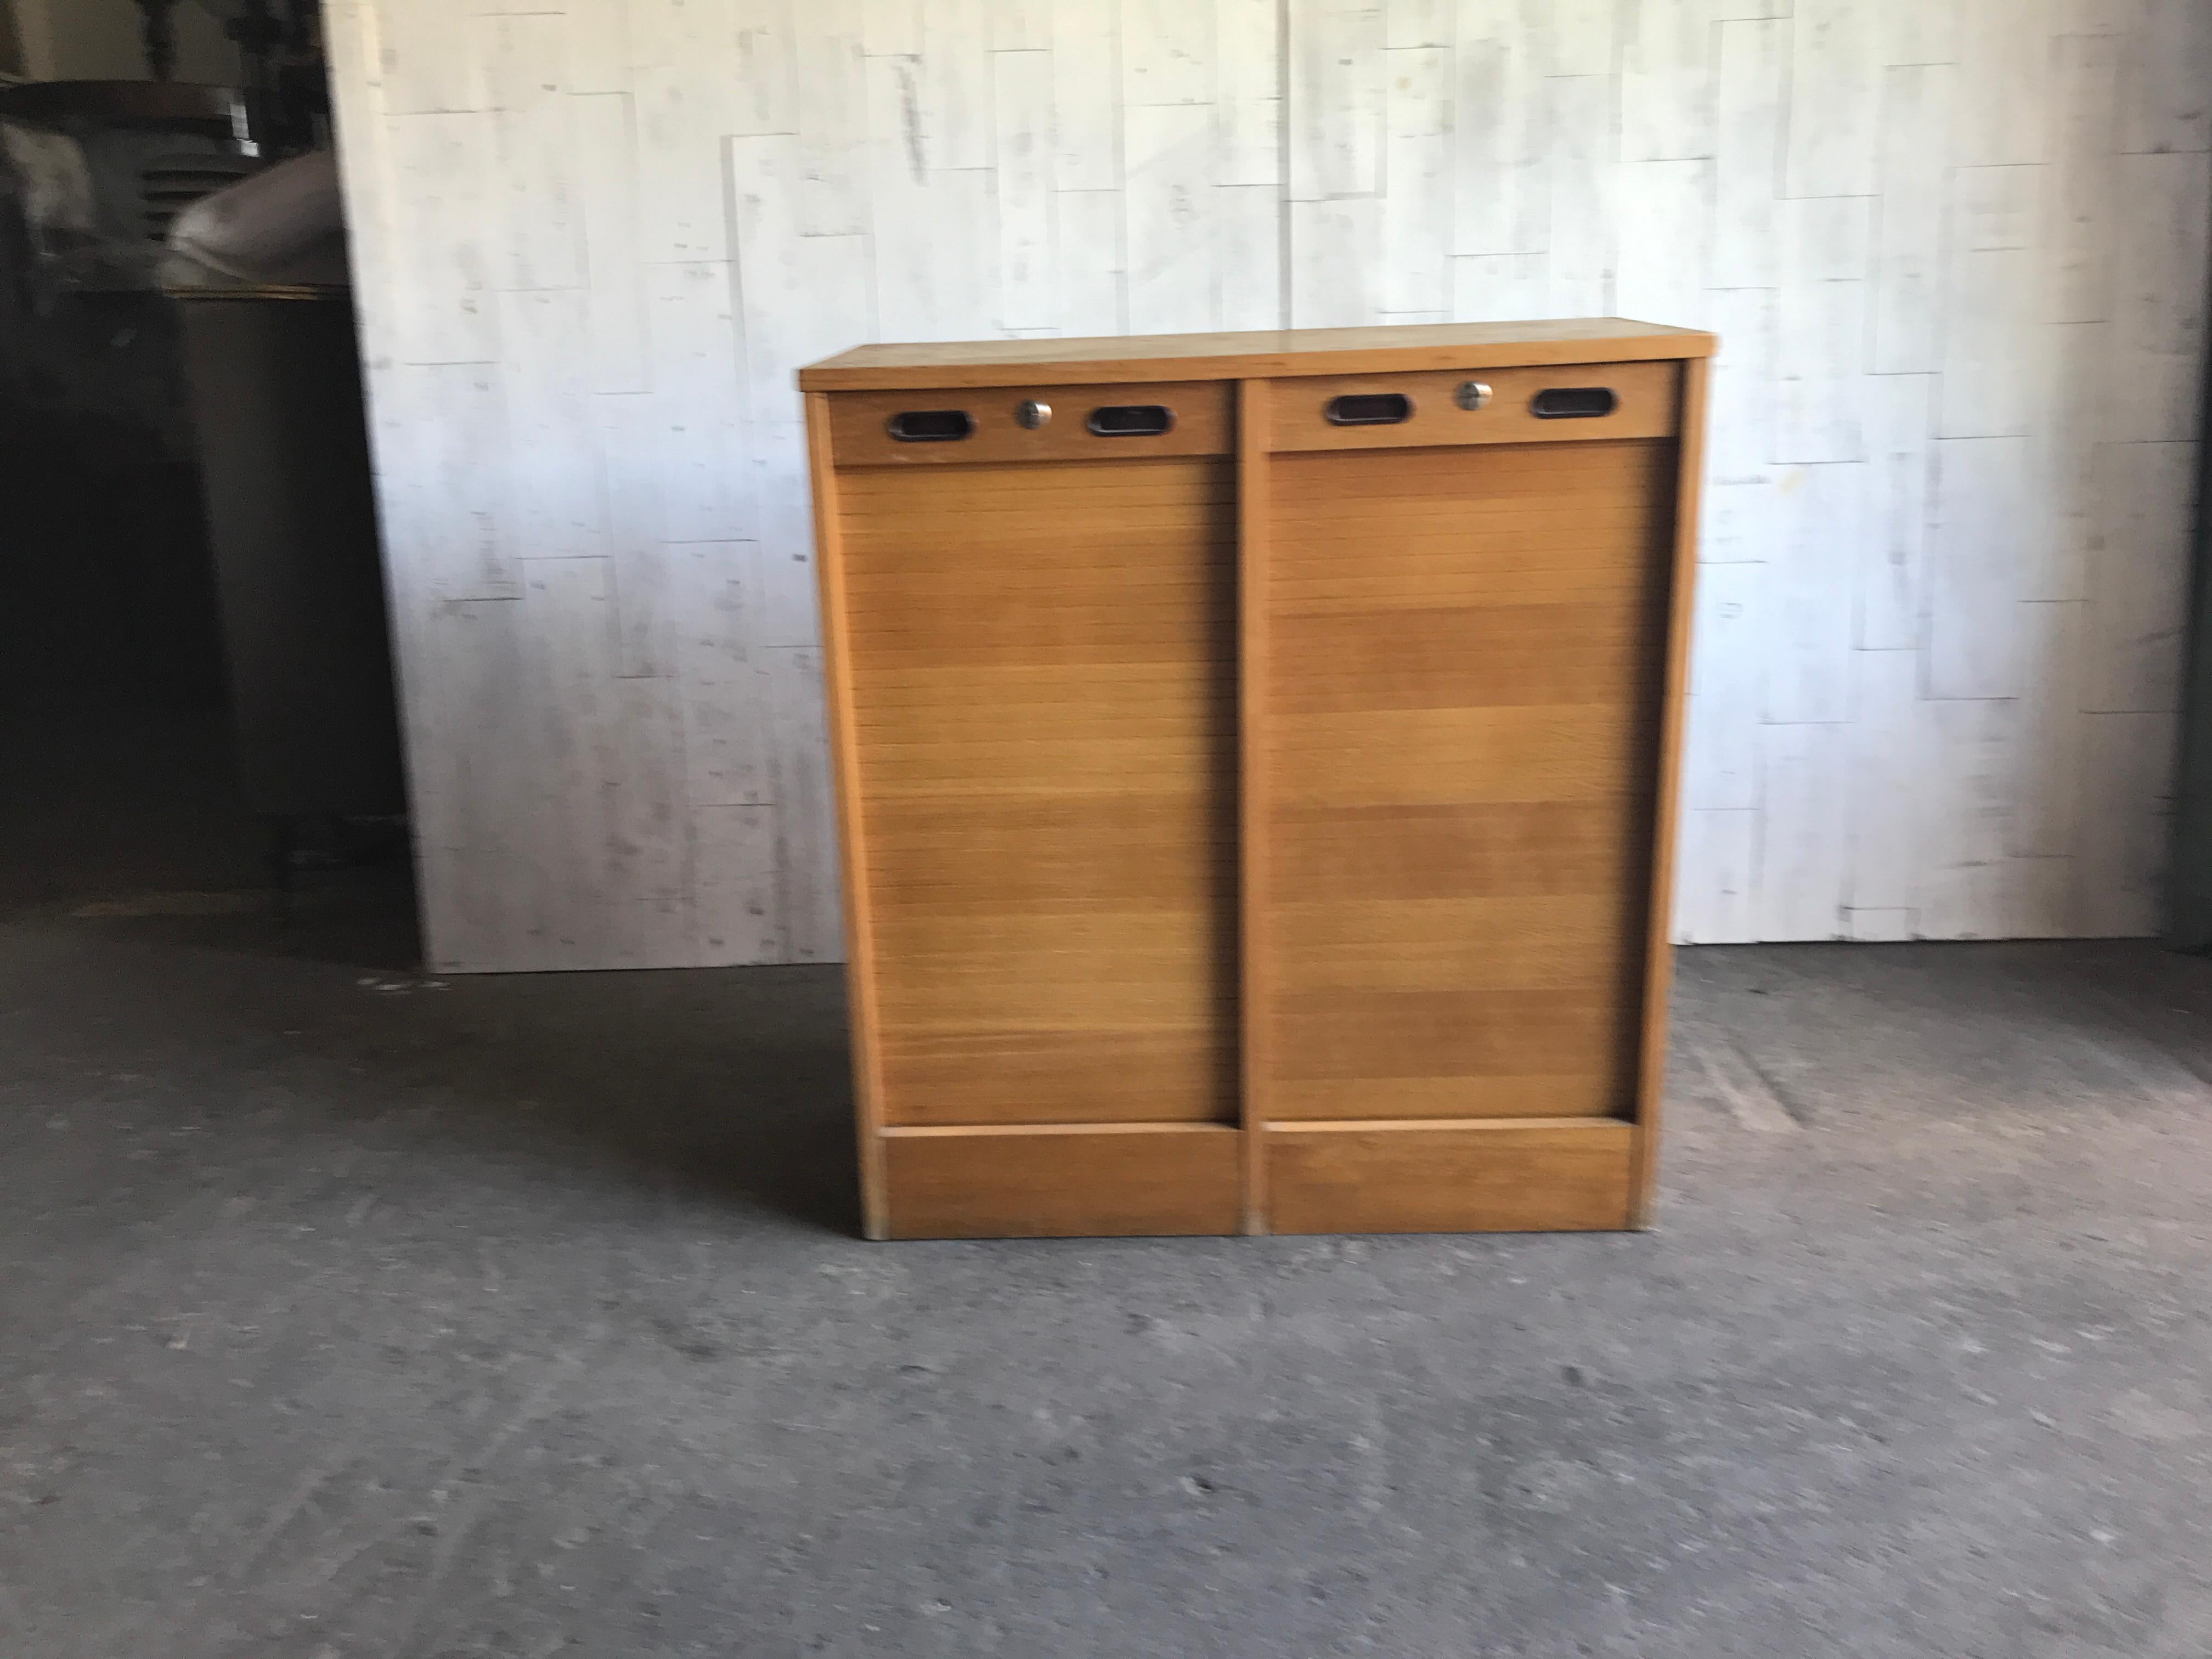 Industrial oak tambour front cabinet, 1950s.
Original good condition
Size: 83 x 91 x 39
Mid-20th century Industrial double tambour front haberdashery filing cabinet.